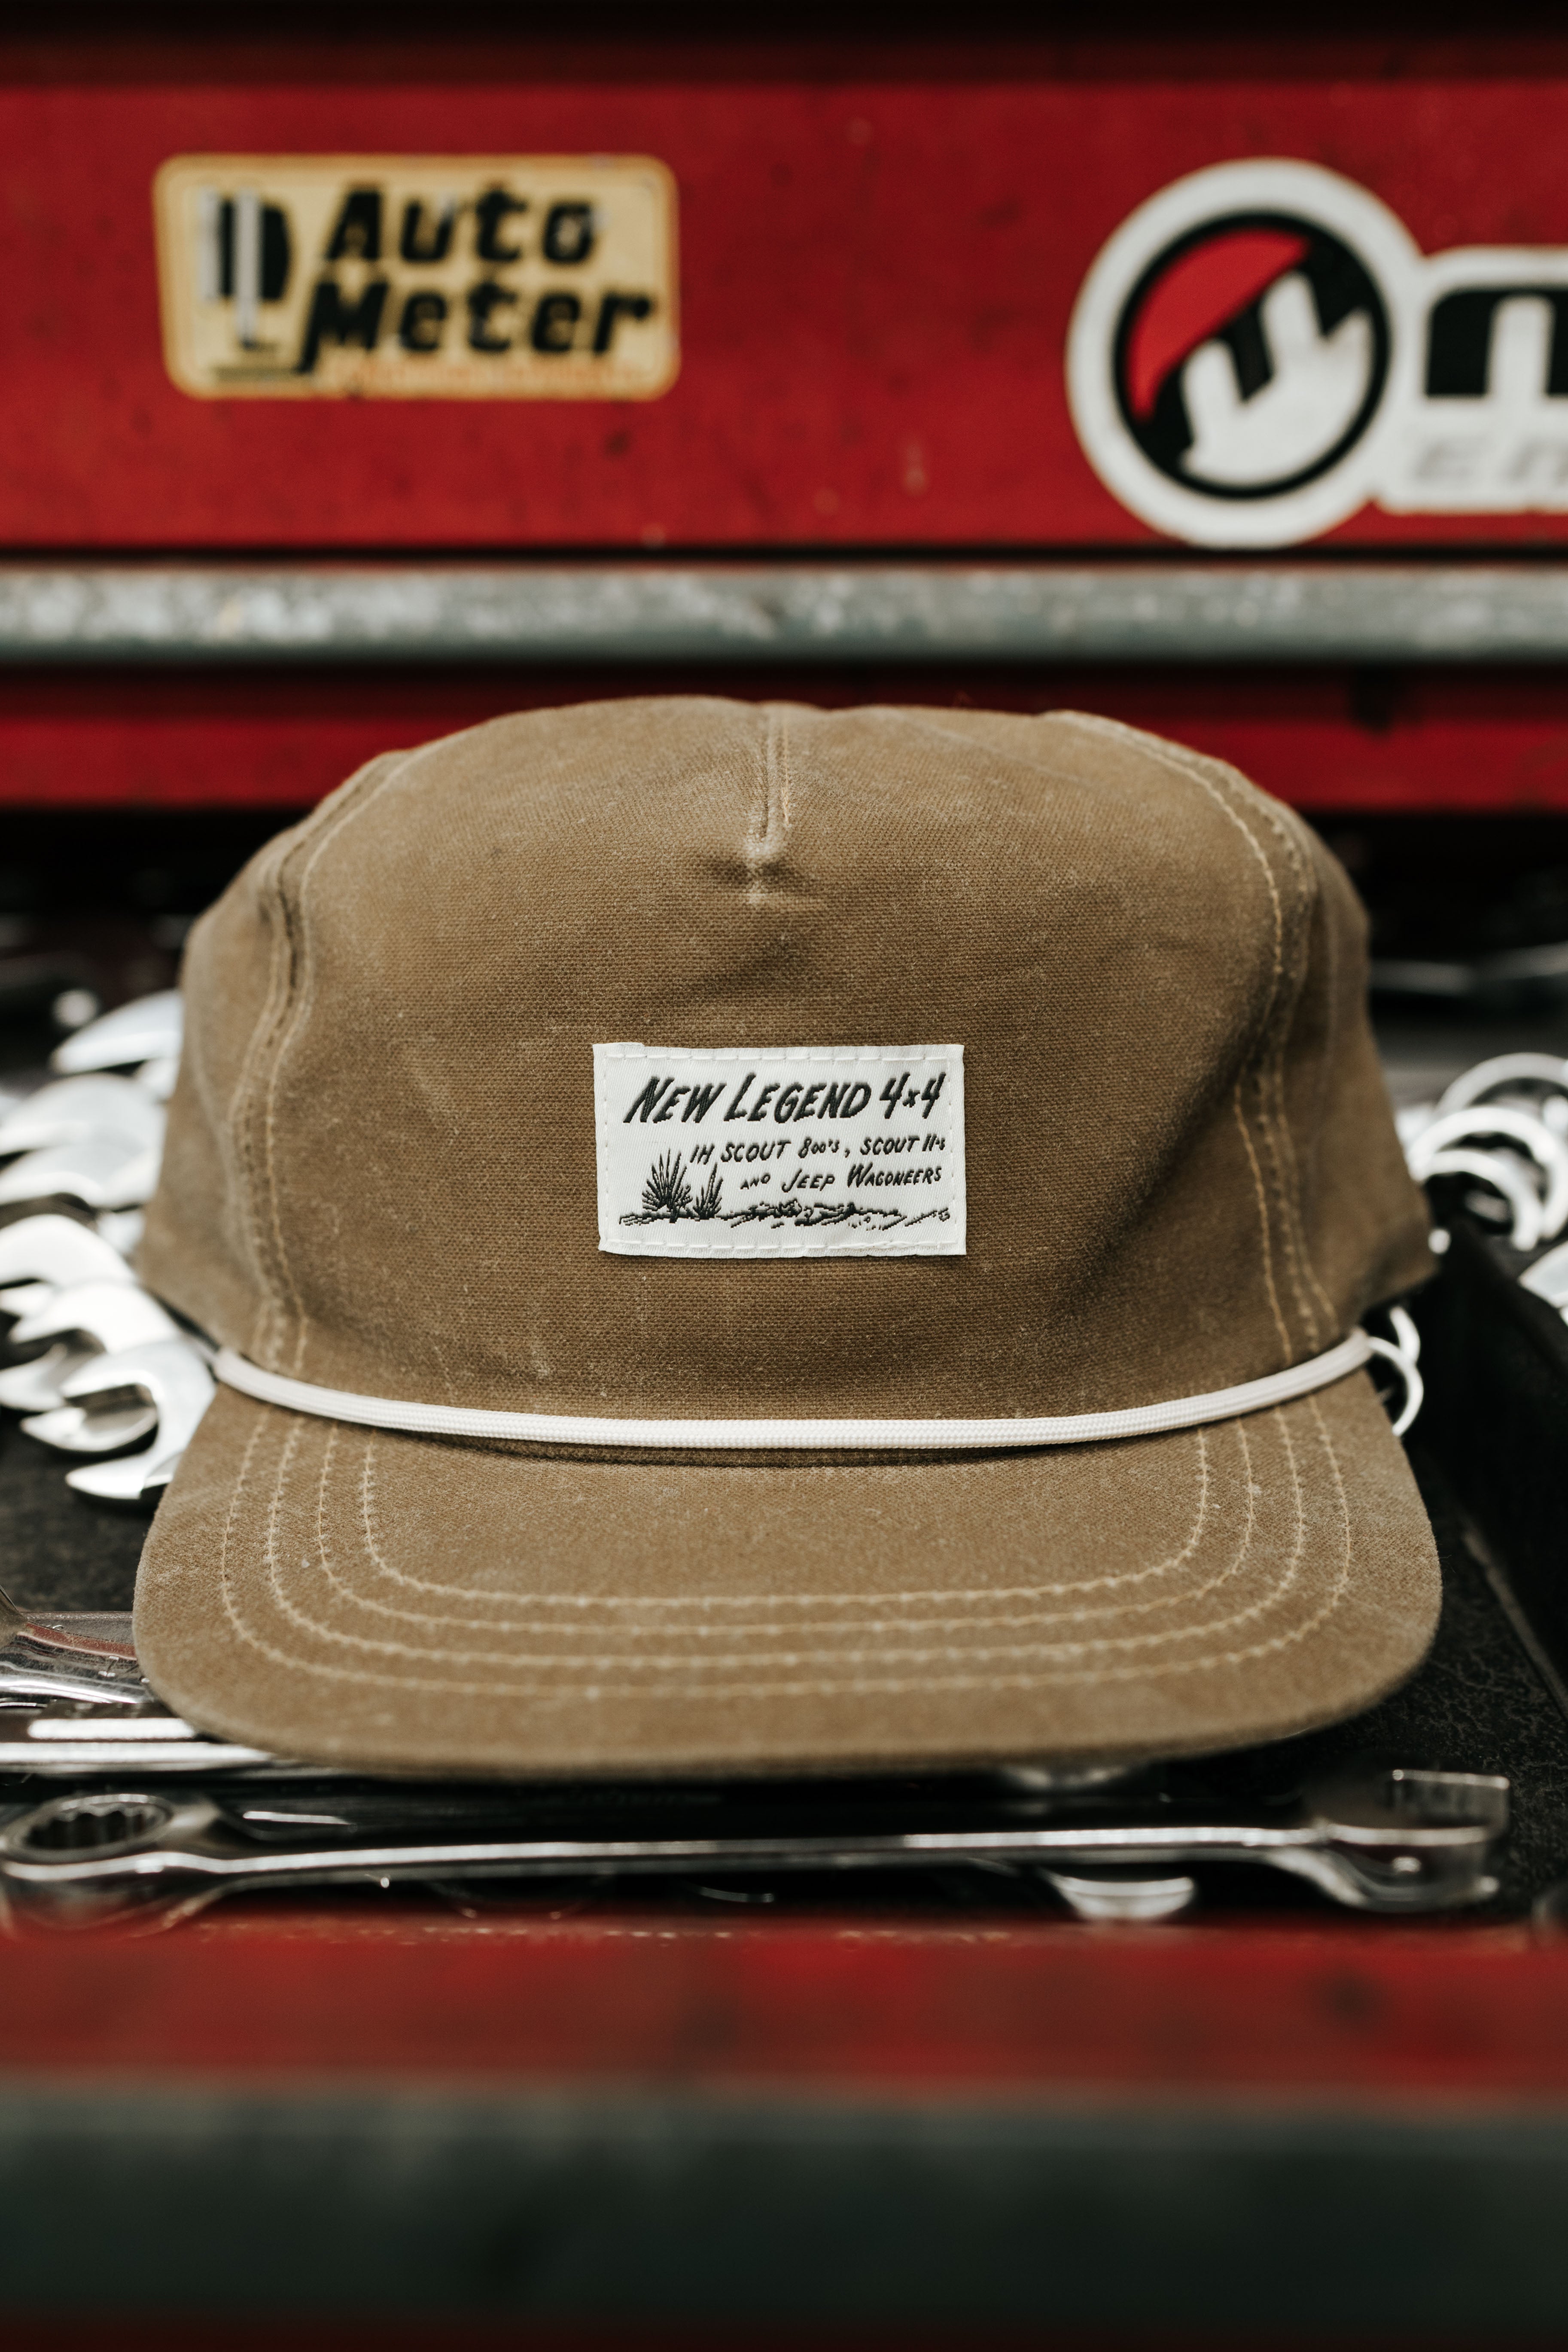 Waxed Canvas 5-Panel Hat – New Legend 4x4